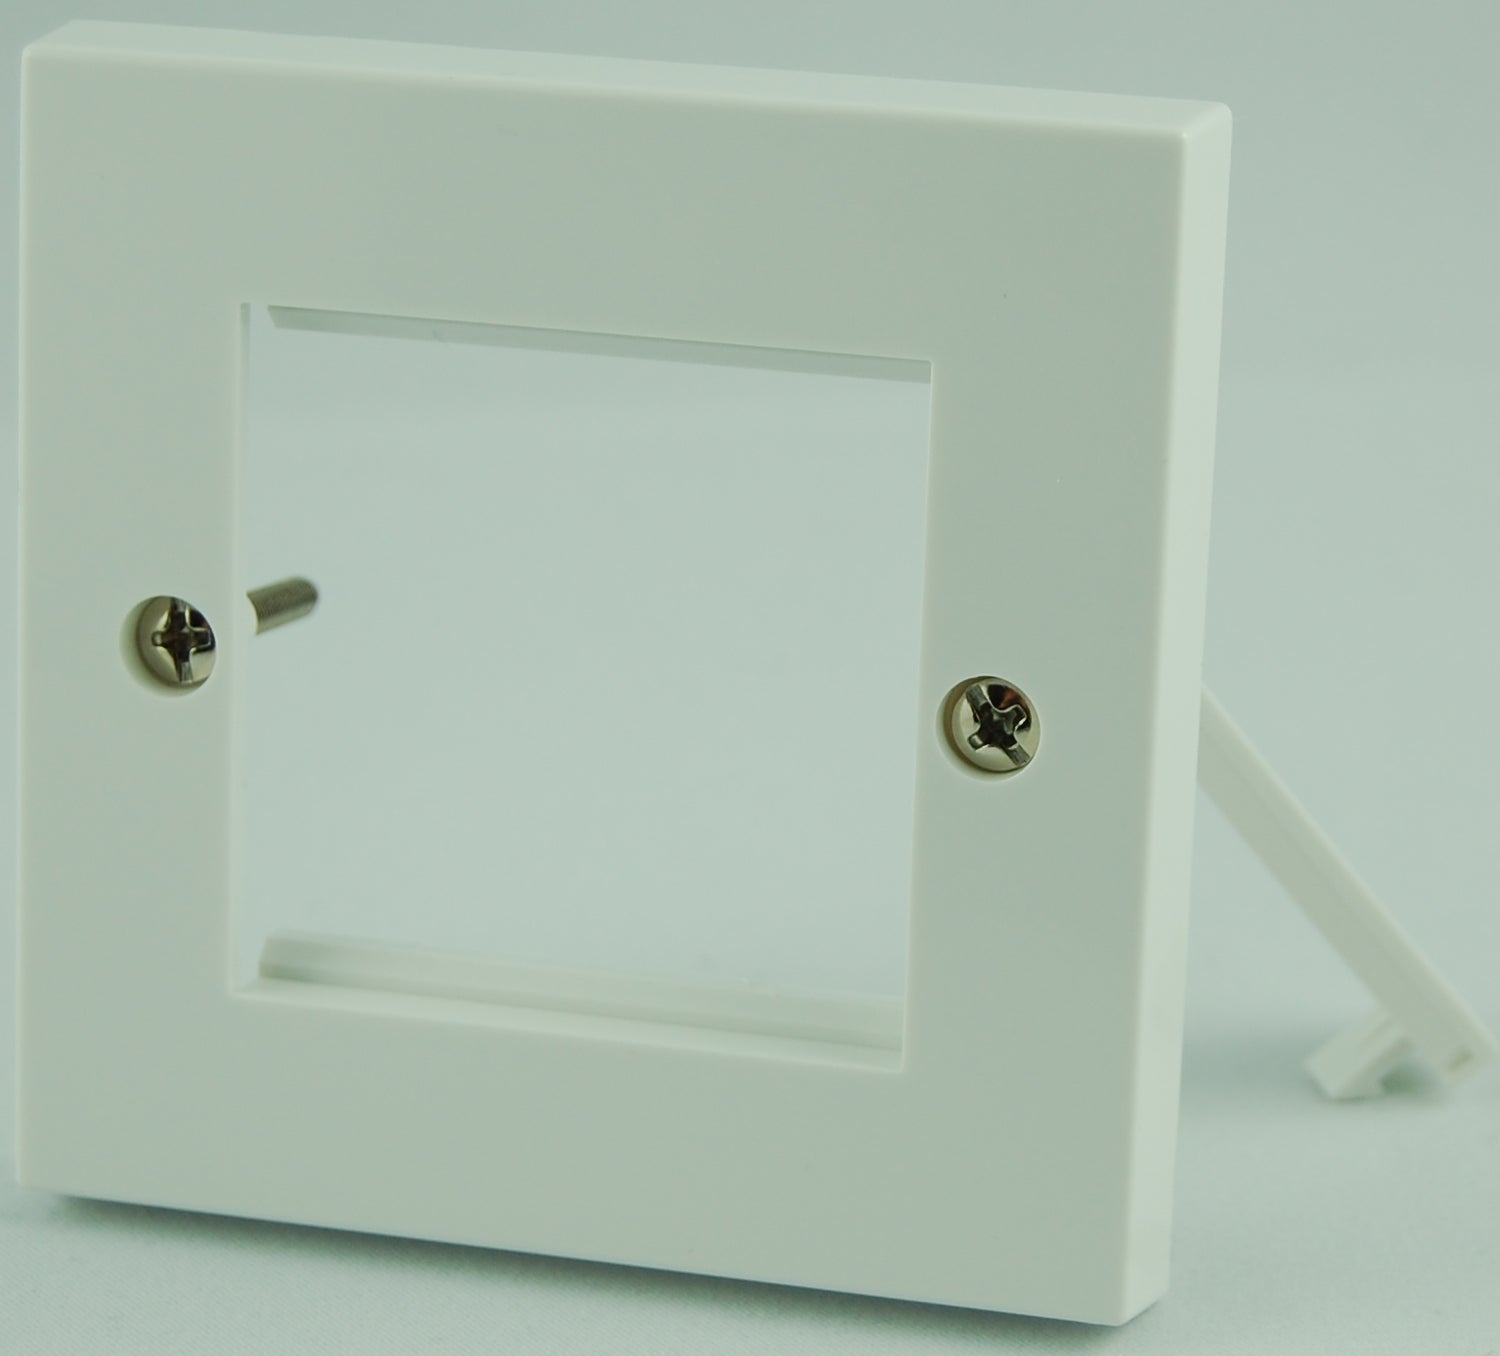 Face plate 86x86 mm (50x50mm window), white